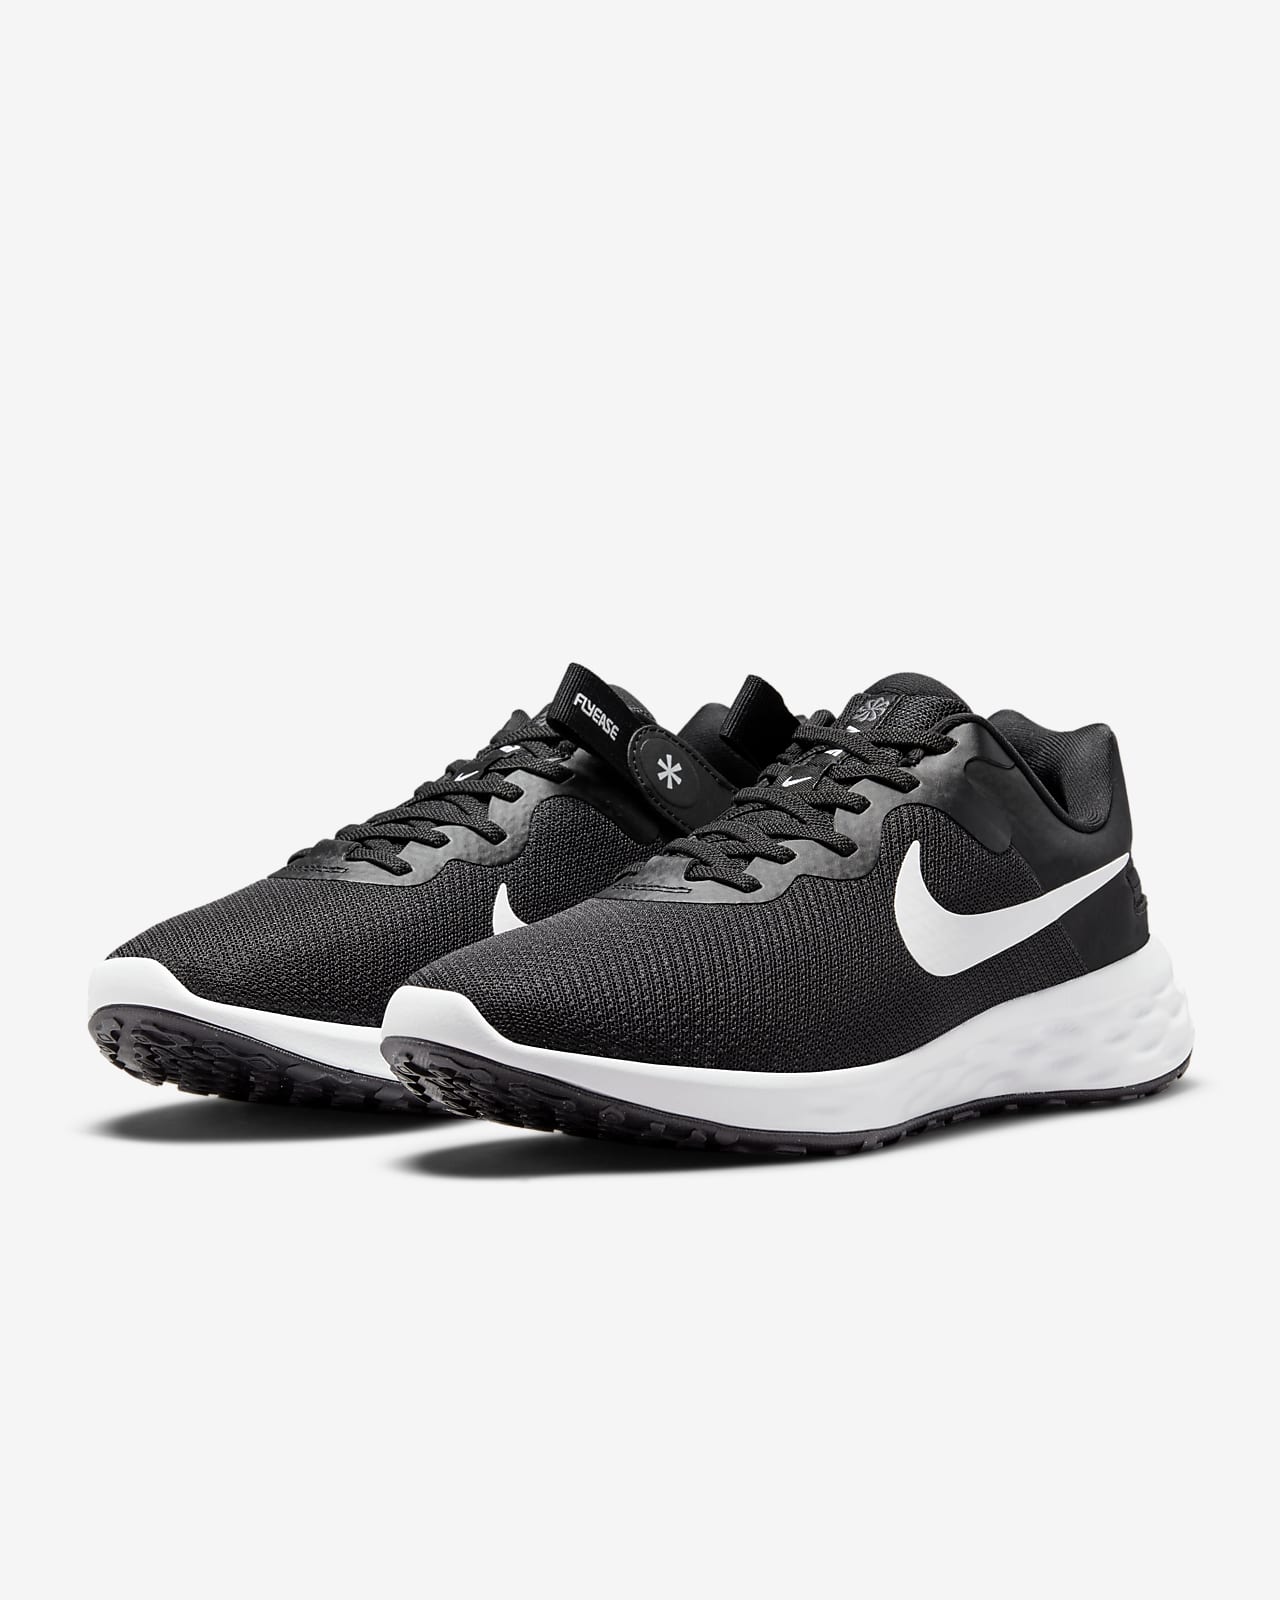 Road CA Revolution On/Off Men\'s Shoes. FlyEase 6 Running Easy Nike Nike